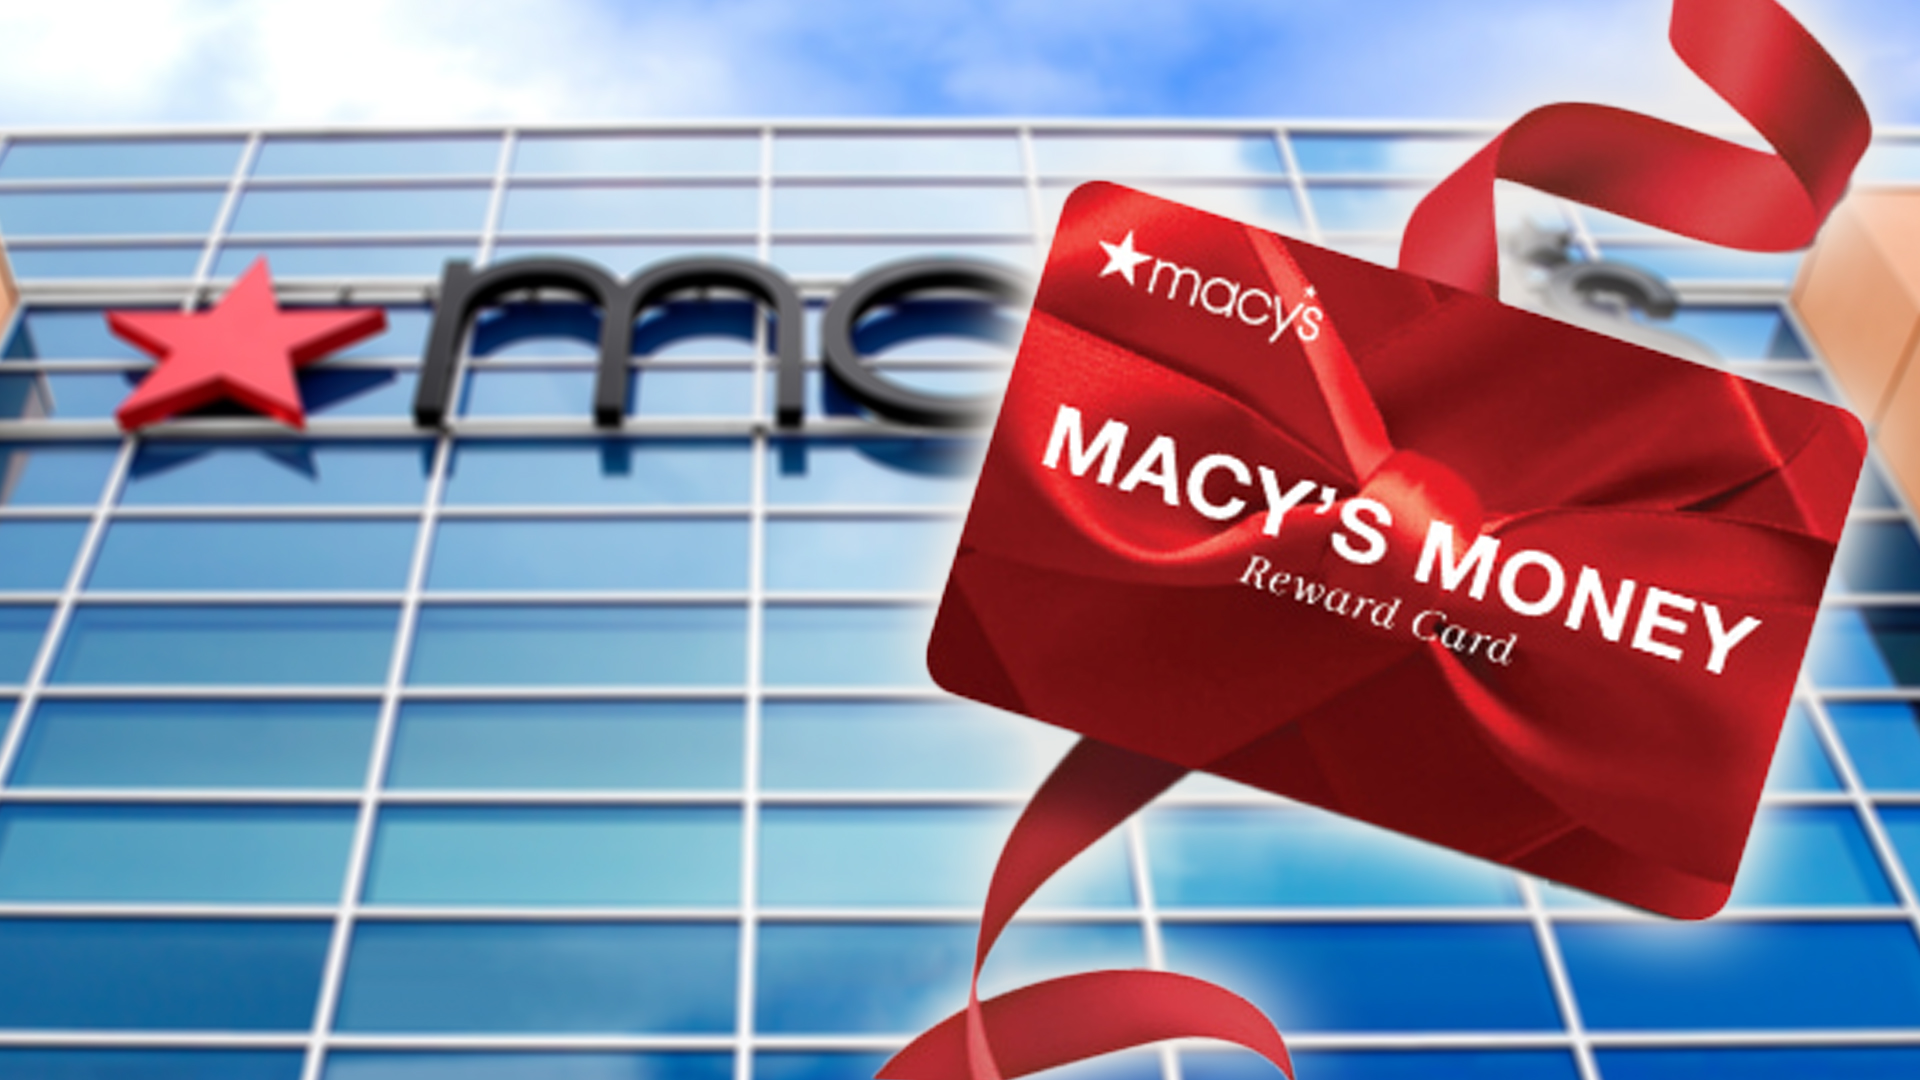 How To Get A Macy’s Coupon While Traveling Abroad